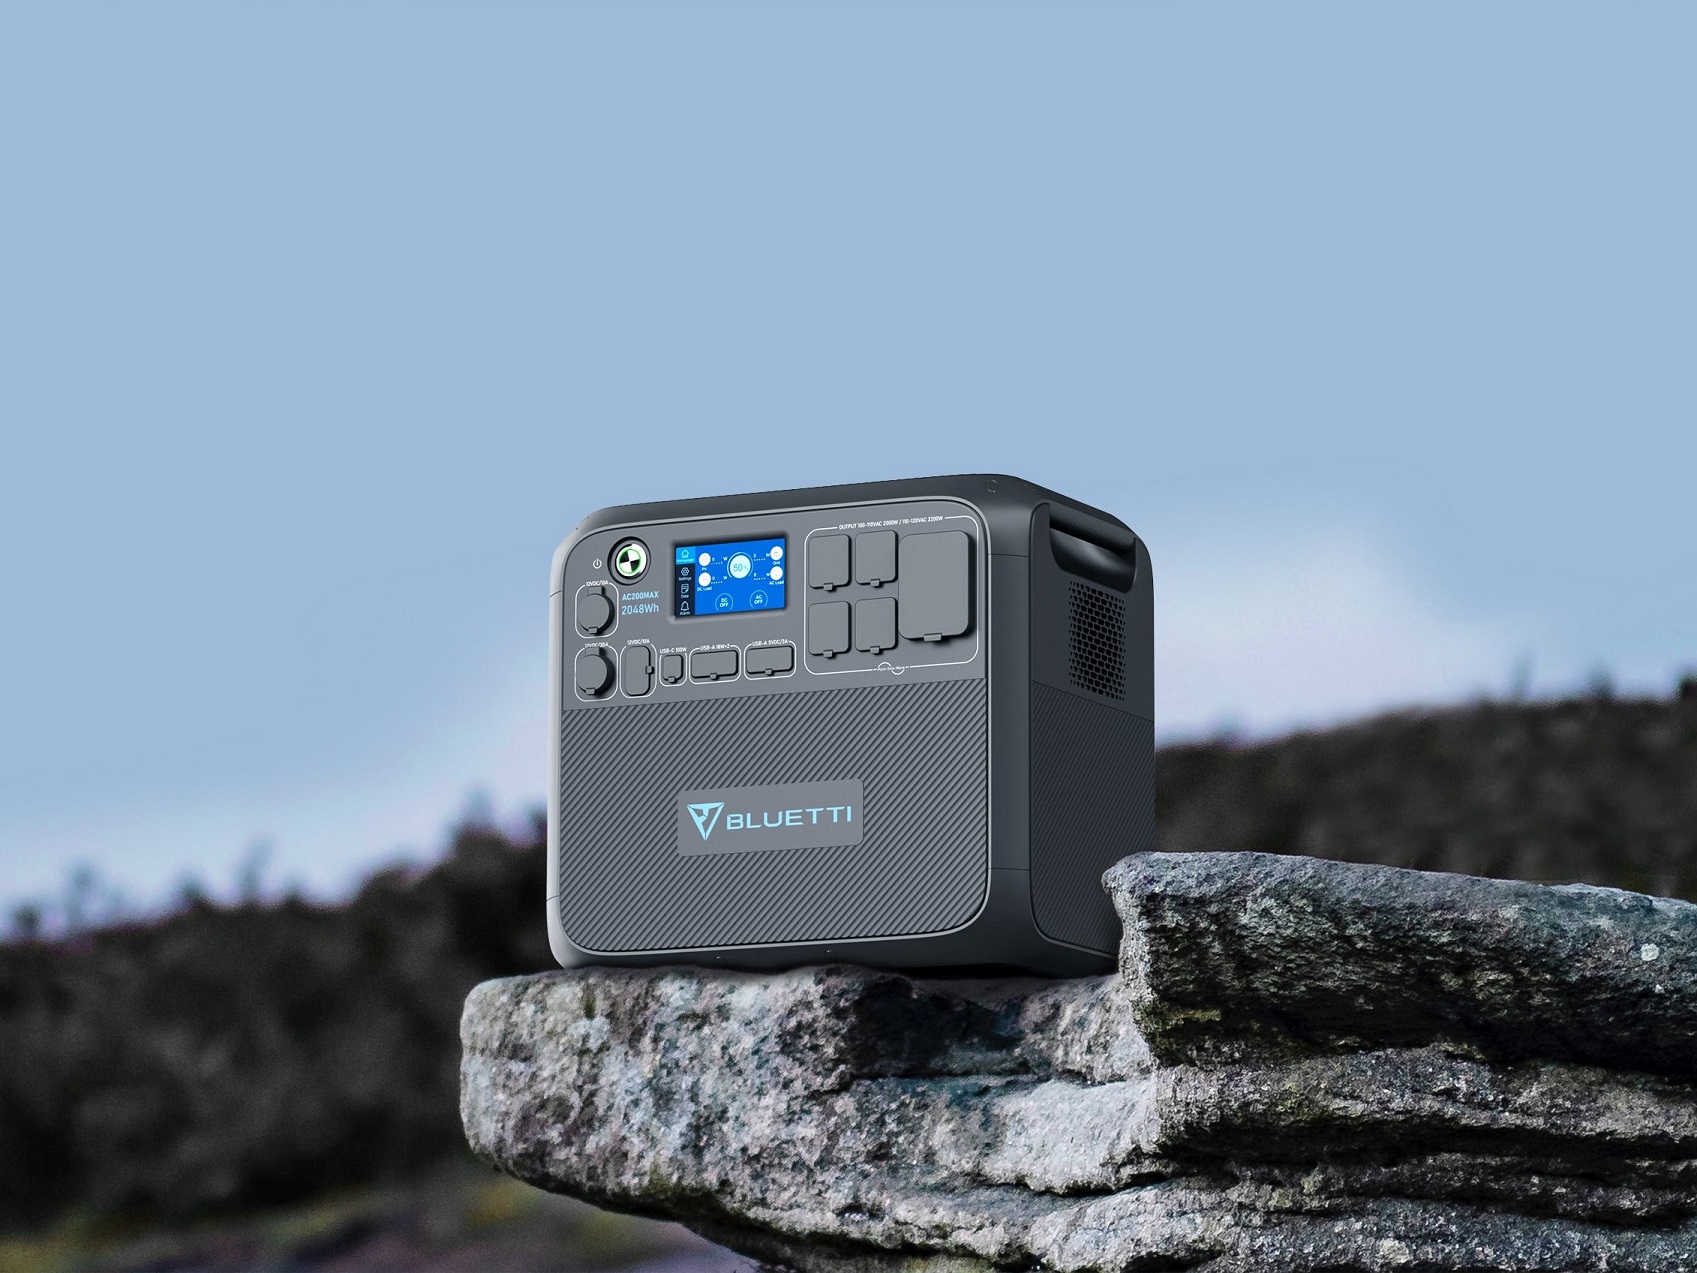 https://www.digitaltrends.com/wp-content/uploads/2022/02/bluetti-ac200max-portable-power-station-off-grid-lifestyle-image.jpg?p=1